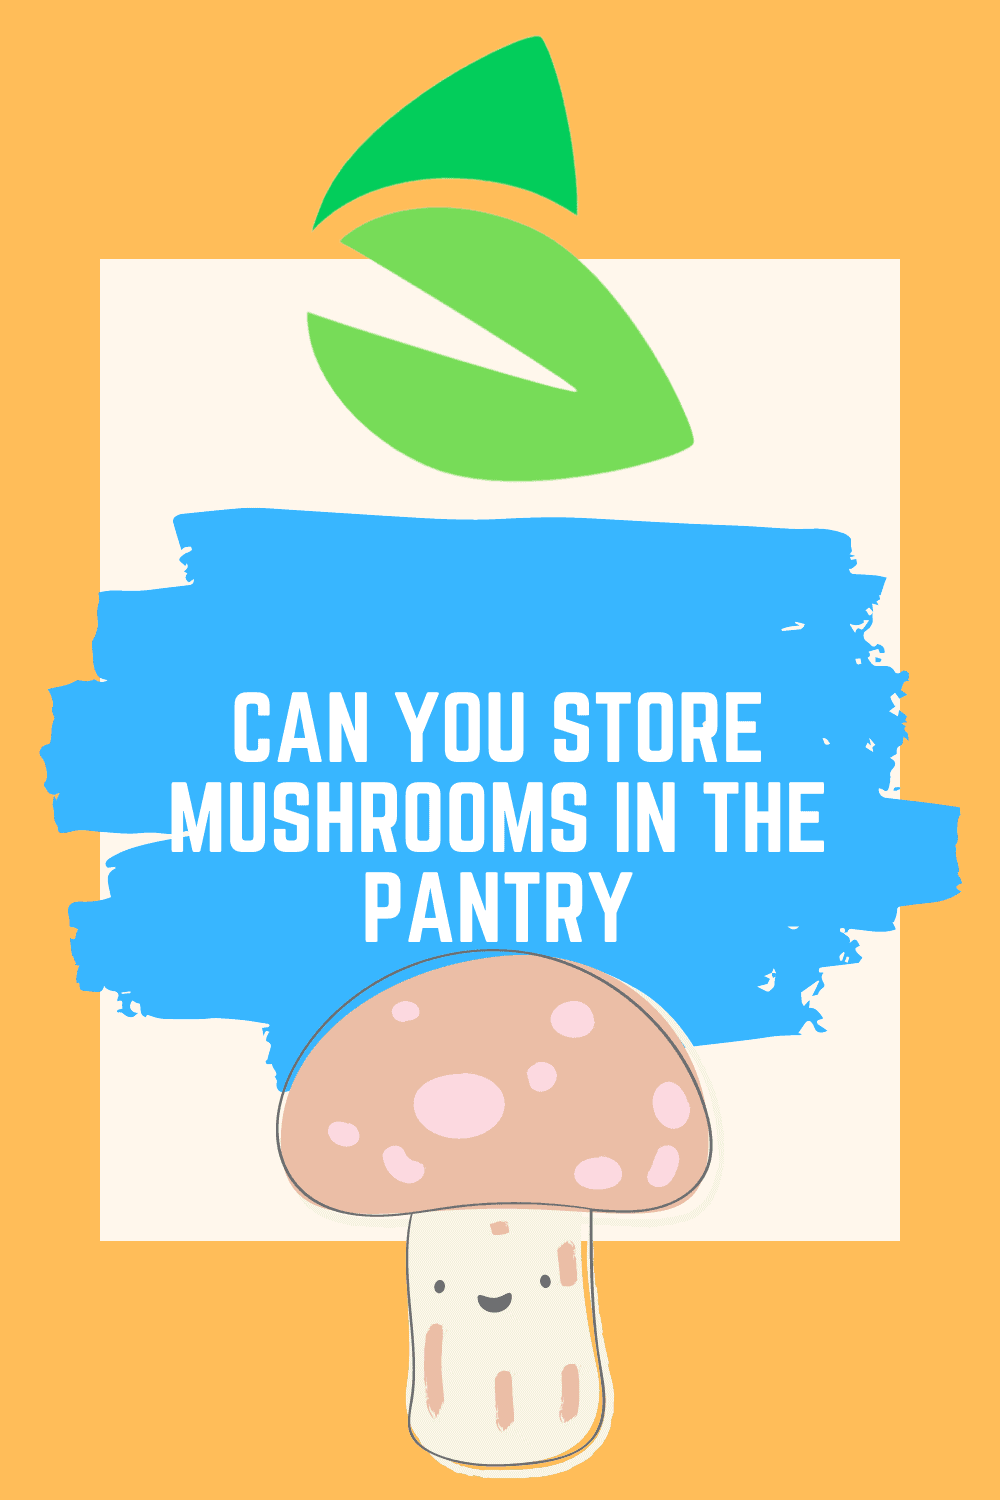 Can You Store Mushrooms in the Pantry